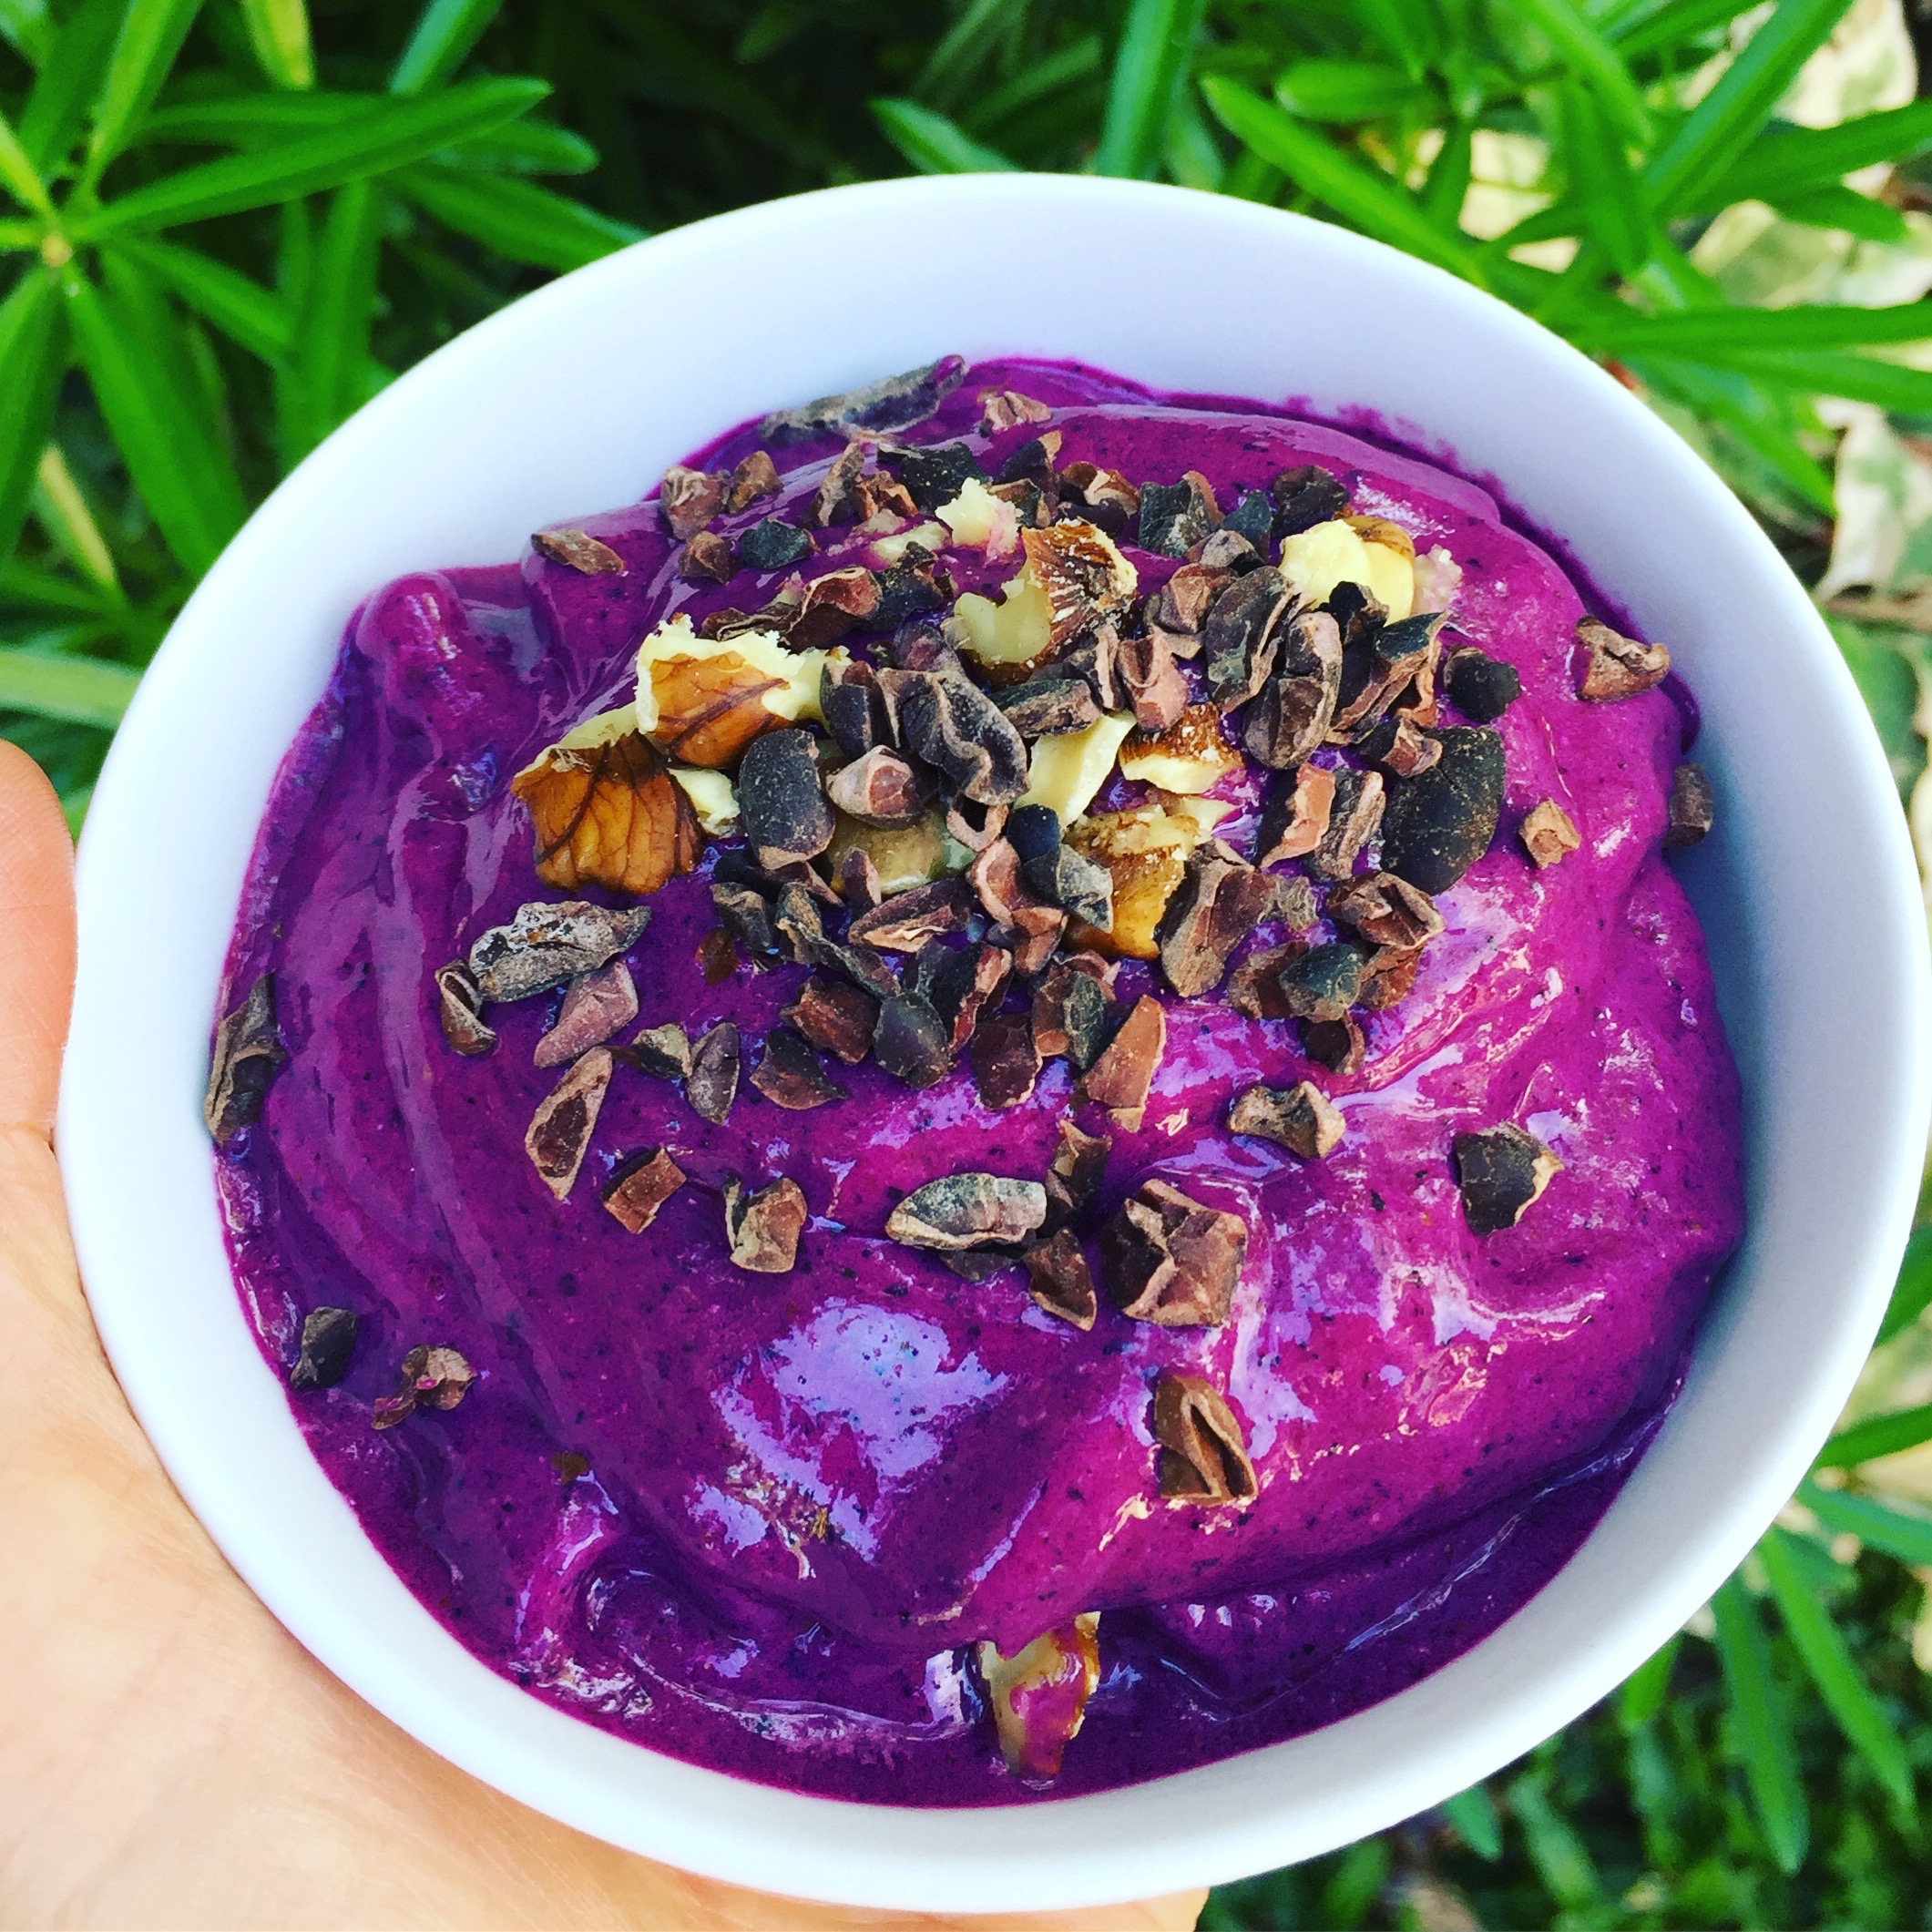 Blueberry dragonfruit smoothie bowl with cacao nibs & walnuts